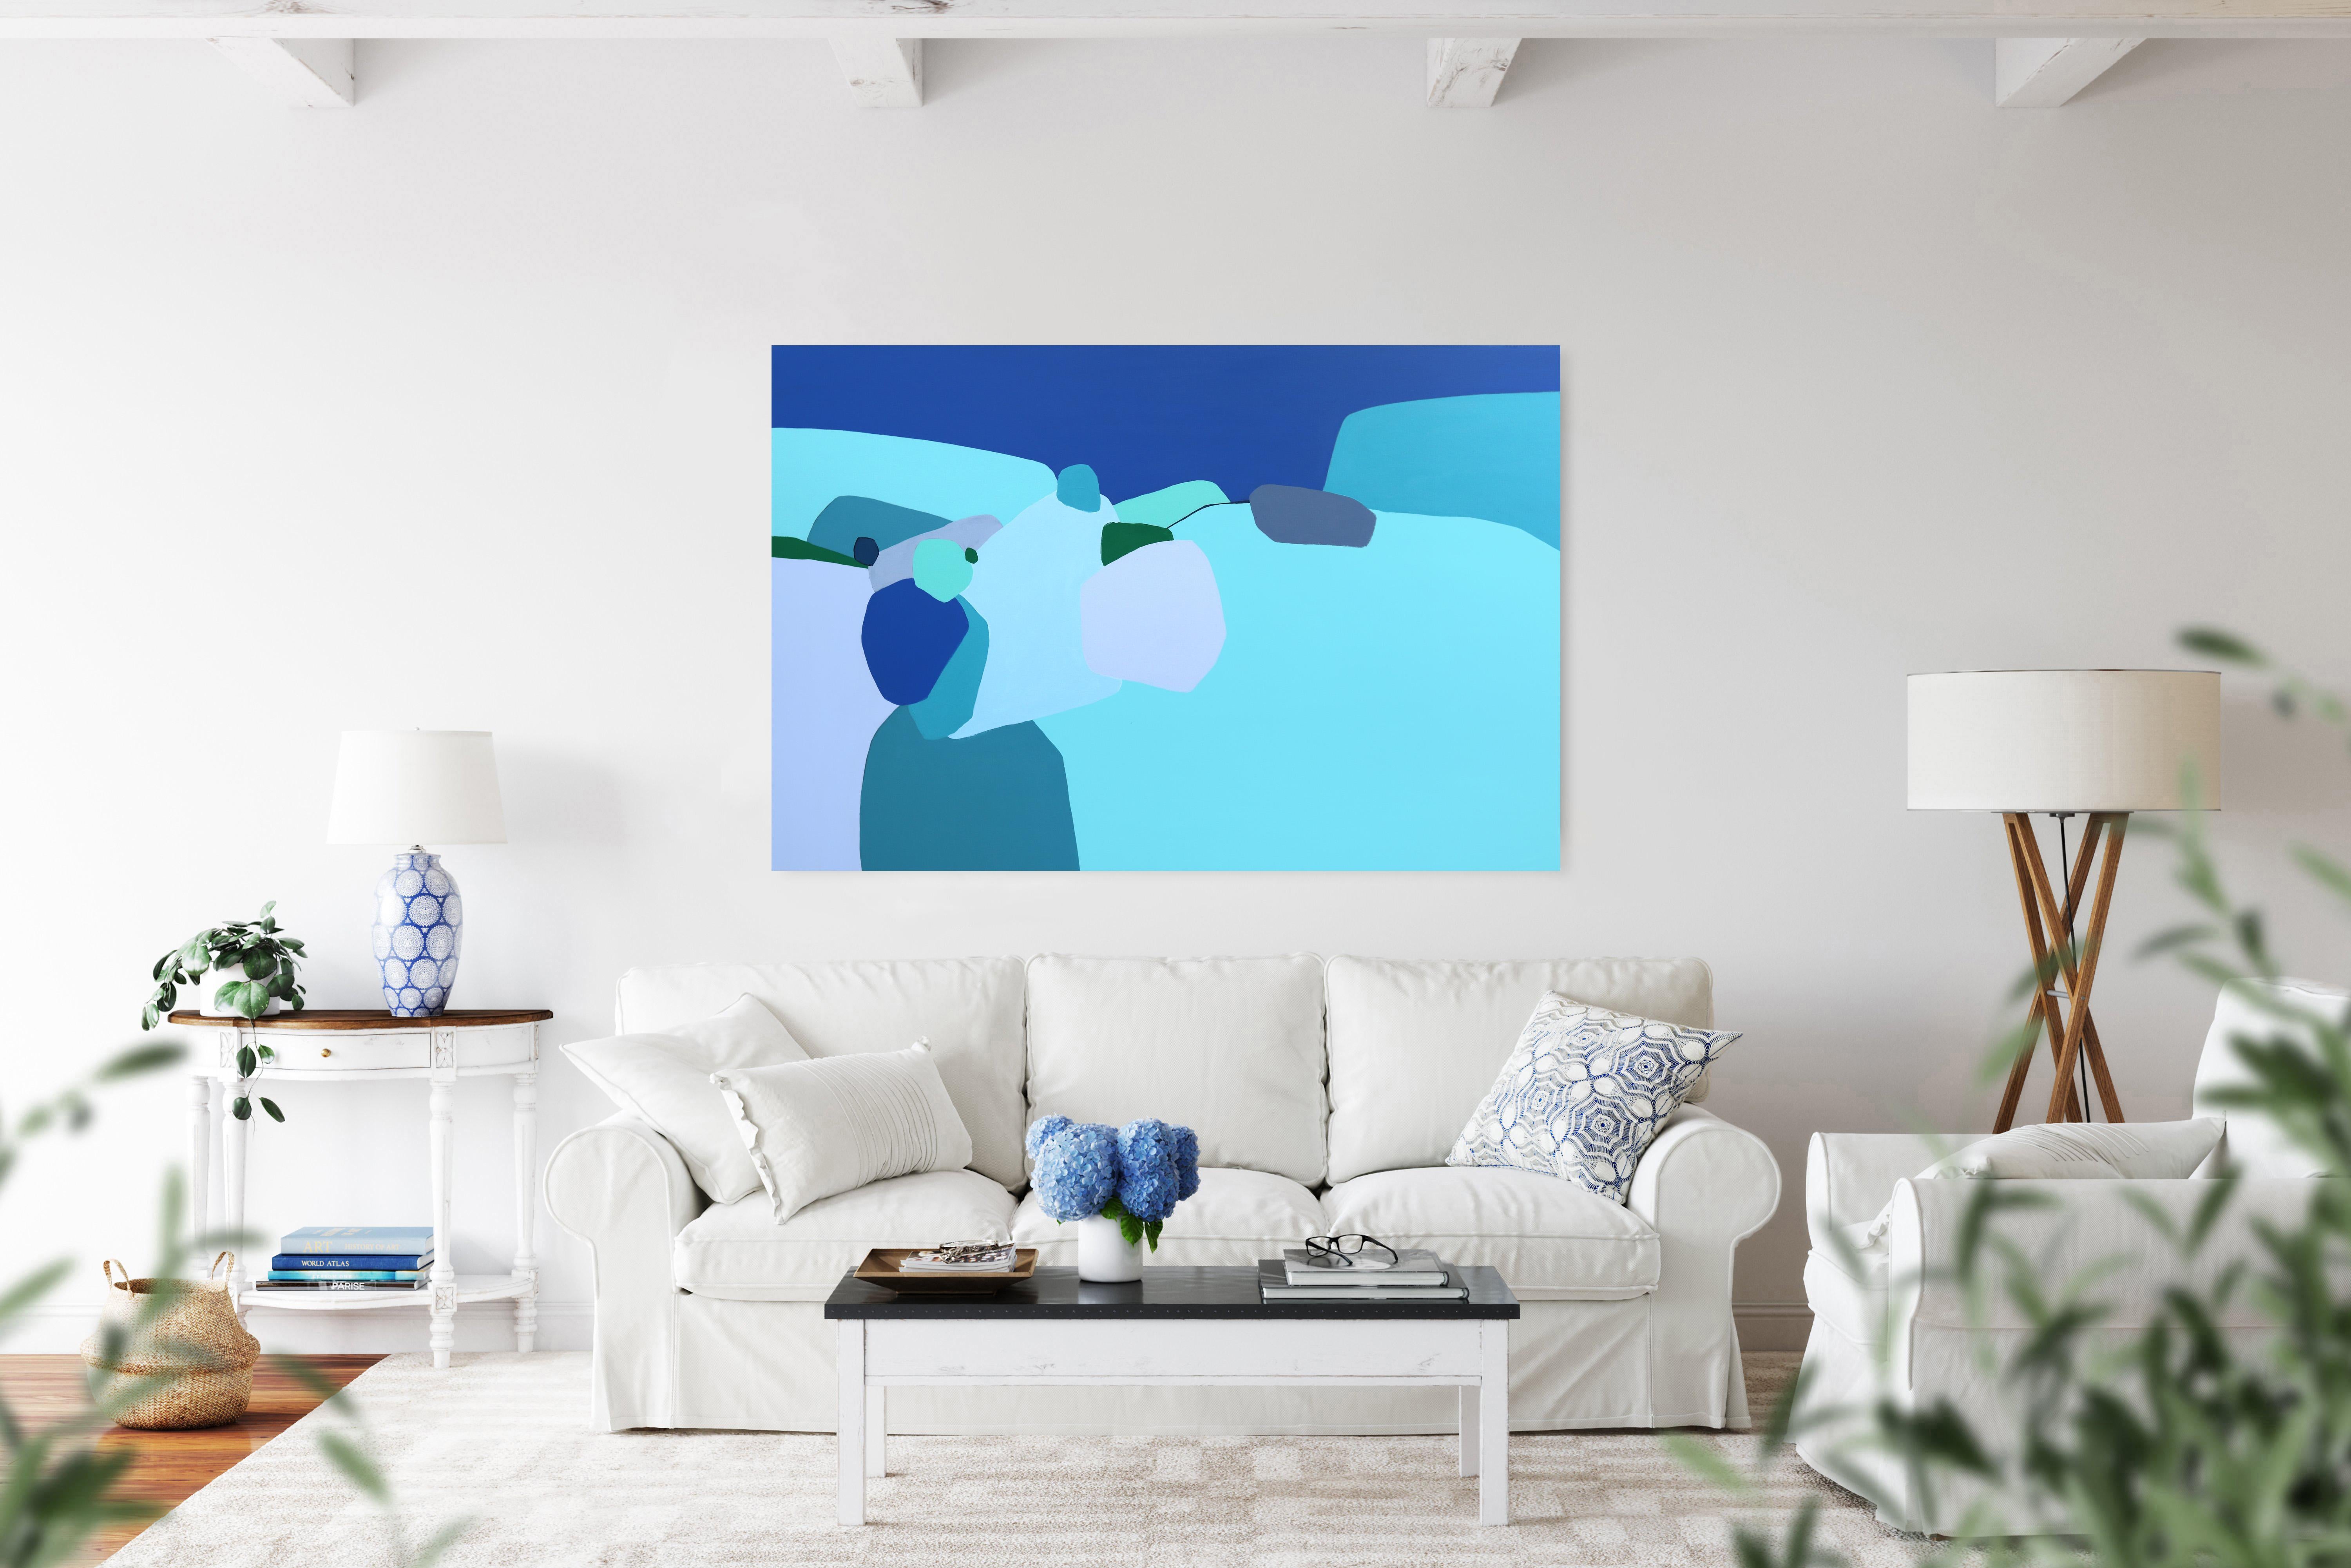 The original artworks by Canadian artist Julie Naima feature visually appealing abstract compositions with organic shapes that evoke a sense of tranquility and serenity. The harmonious interplay of a few carefully selected colors, and their varied